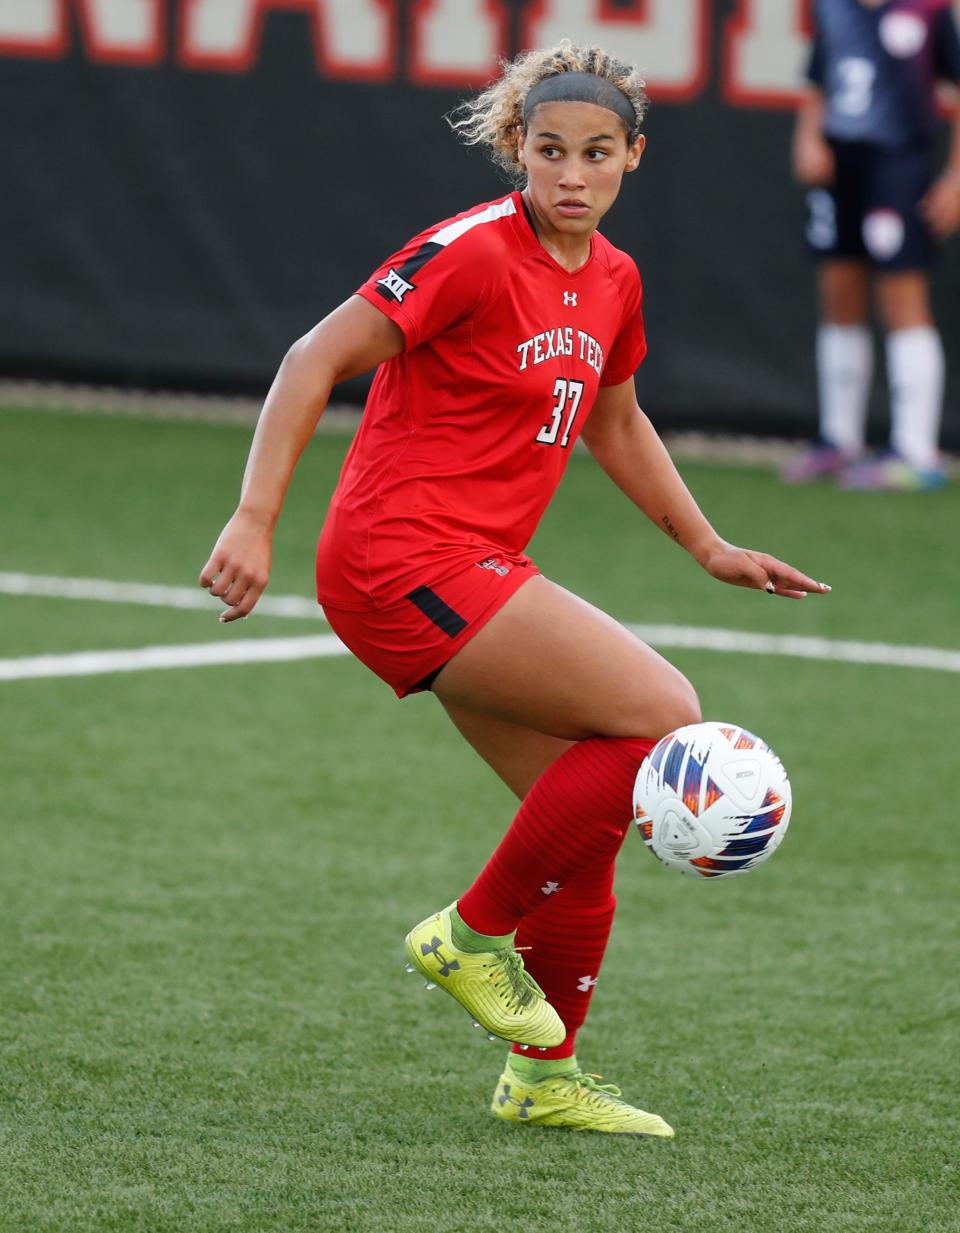 Texas Tech's Ashleigh Williams looks to pass the ball during a scrimmage against Lubbock Christian University, Tuesday, August 9, 2022, at the John Walker Soccer Complex.